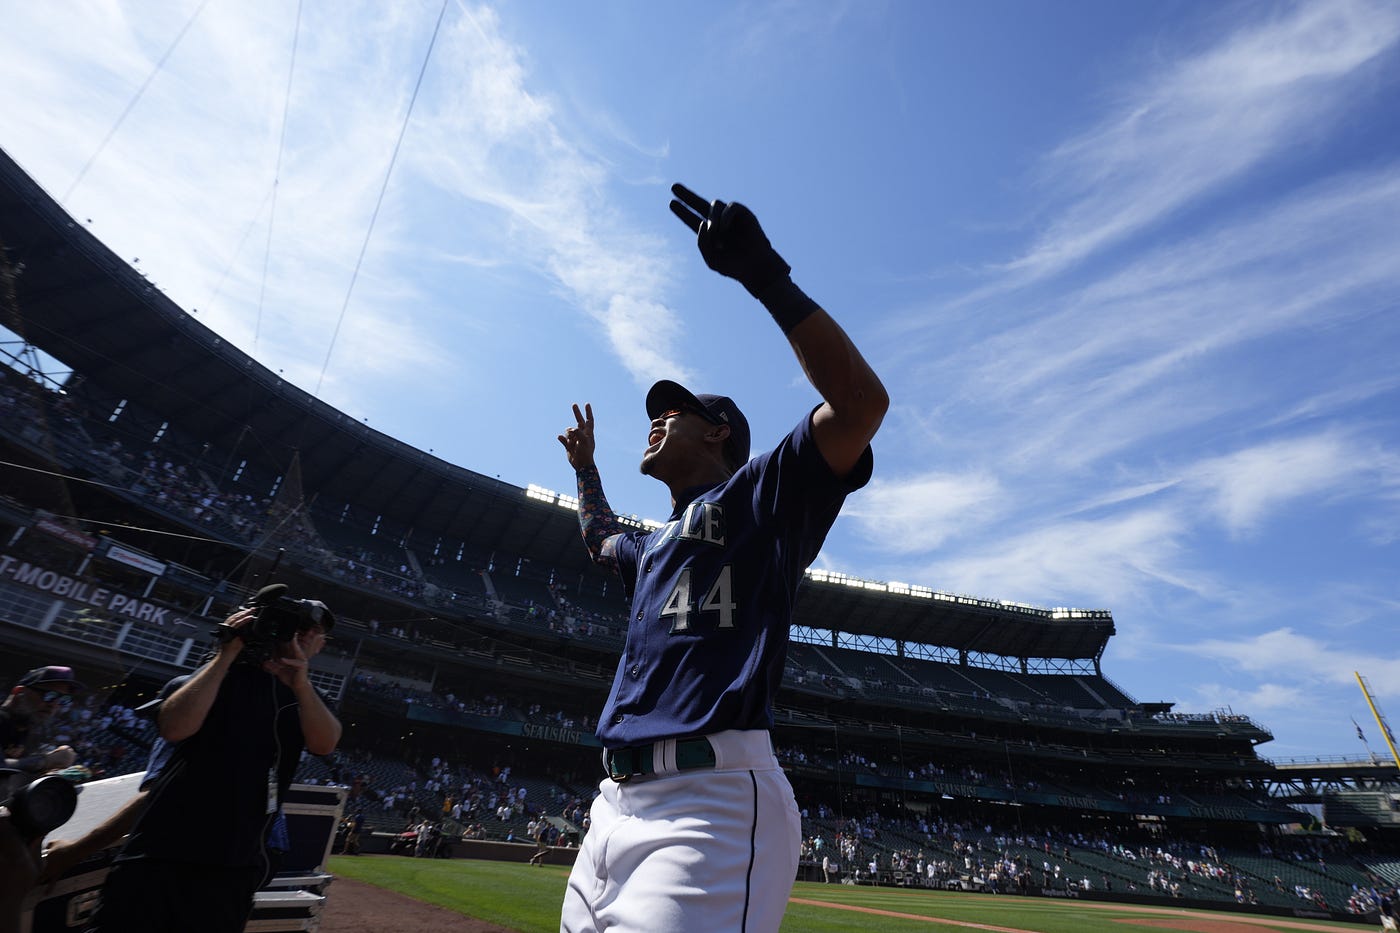 Seattle Mariners - A historic day for Julio and Mariners fans! We have  agreed to a long-term contract extension with All-Star Julio Rodríguez,  including 12-guaranteed years through the 2034 season and options